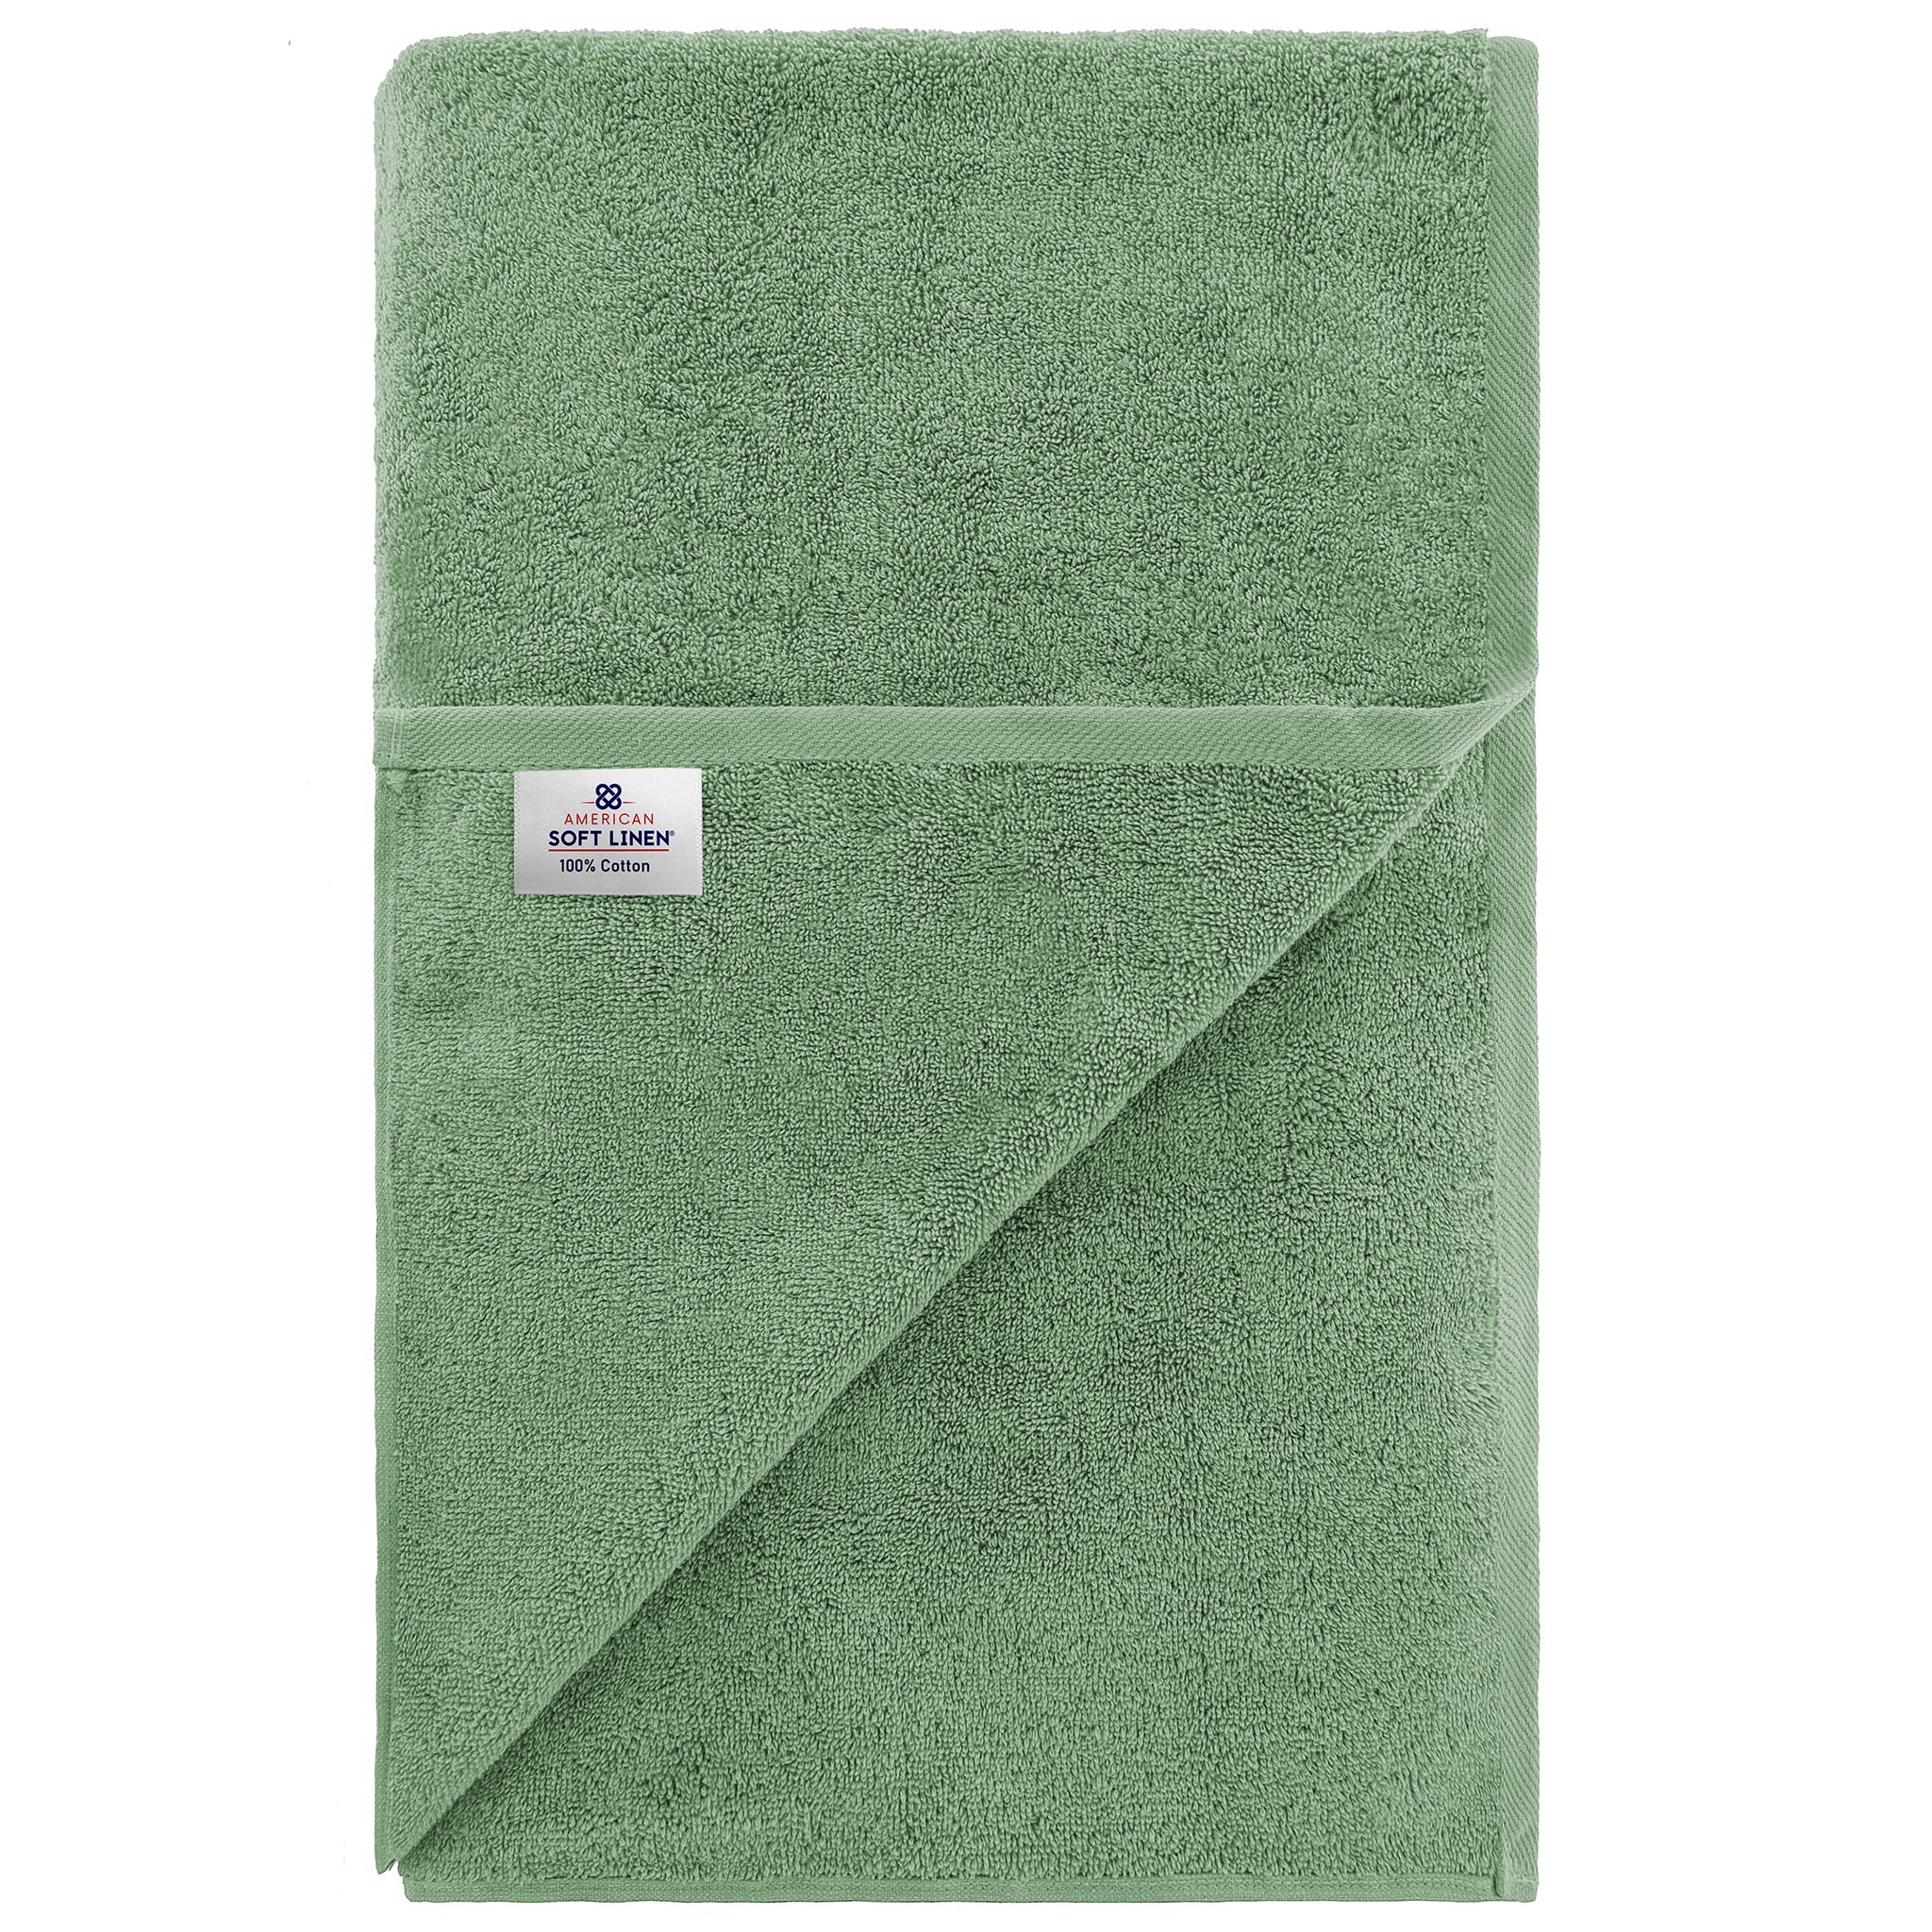 American Soft Linen 100% Ring Spun Cotton 40x80 Inches Oversized Bath Sheets sage-green-7